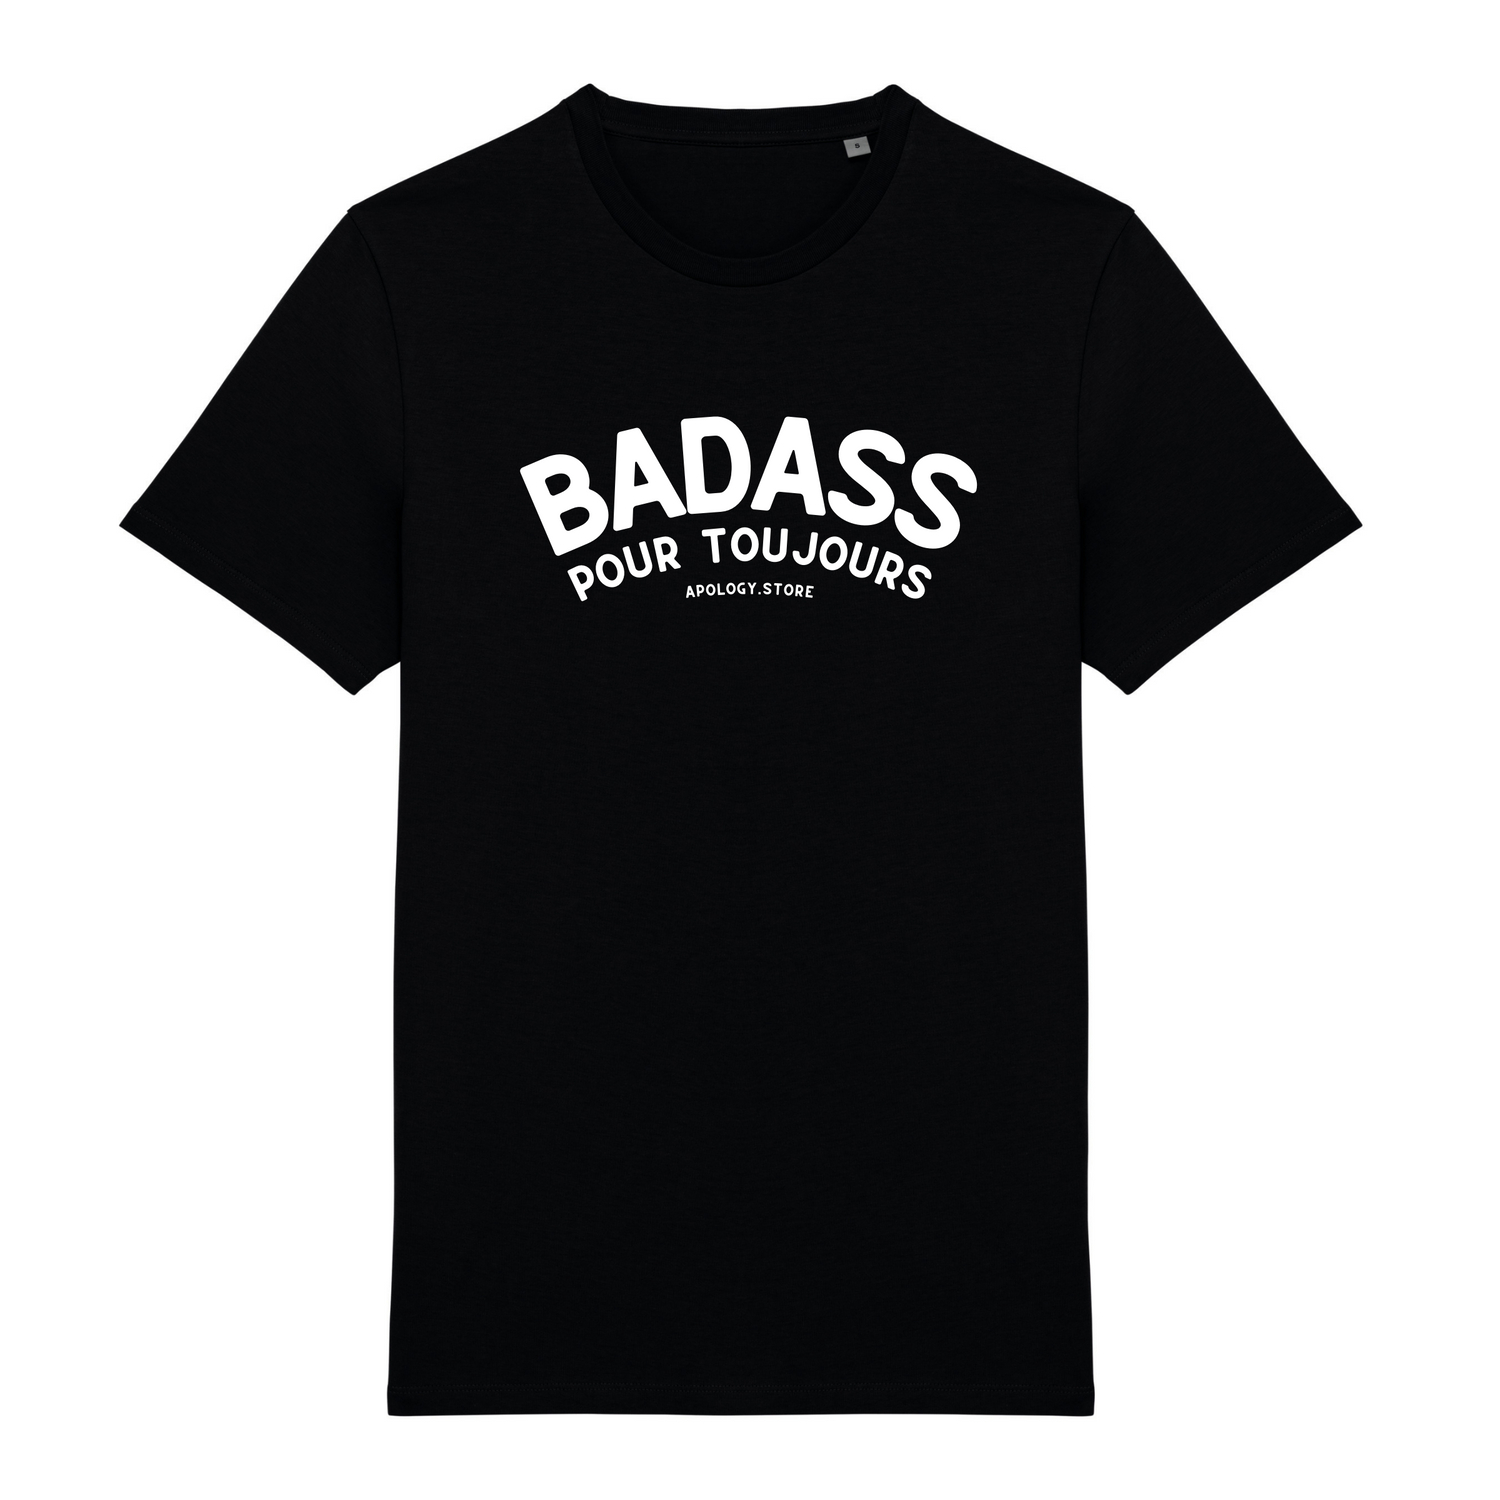 Badass Forever T-shirt - organic cotton - Made in Portugal